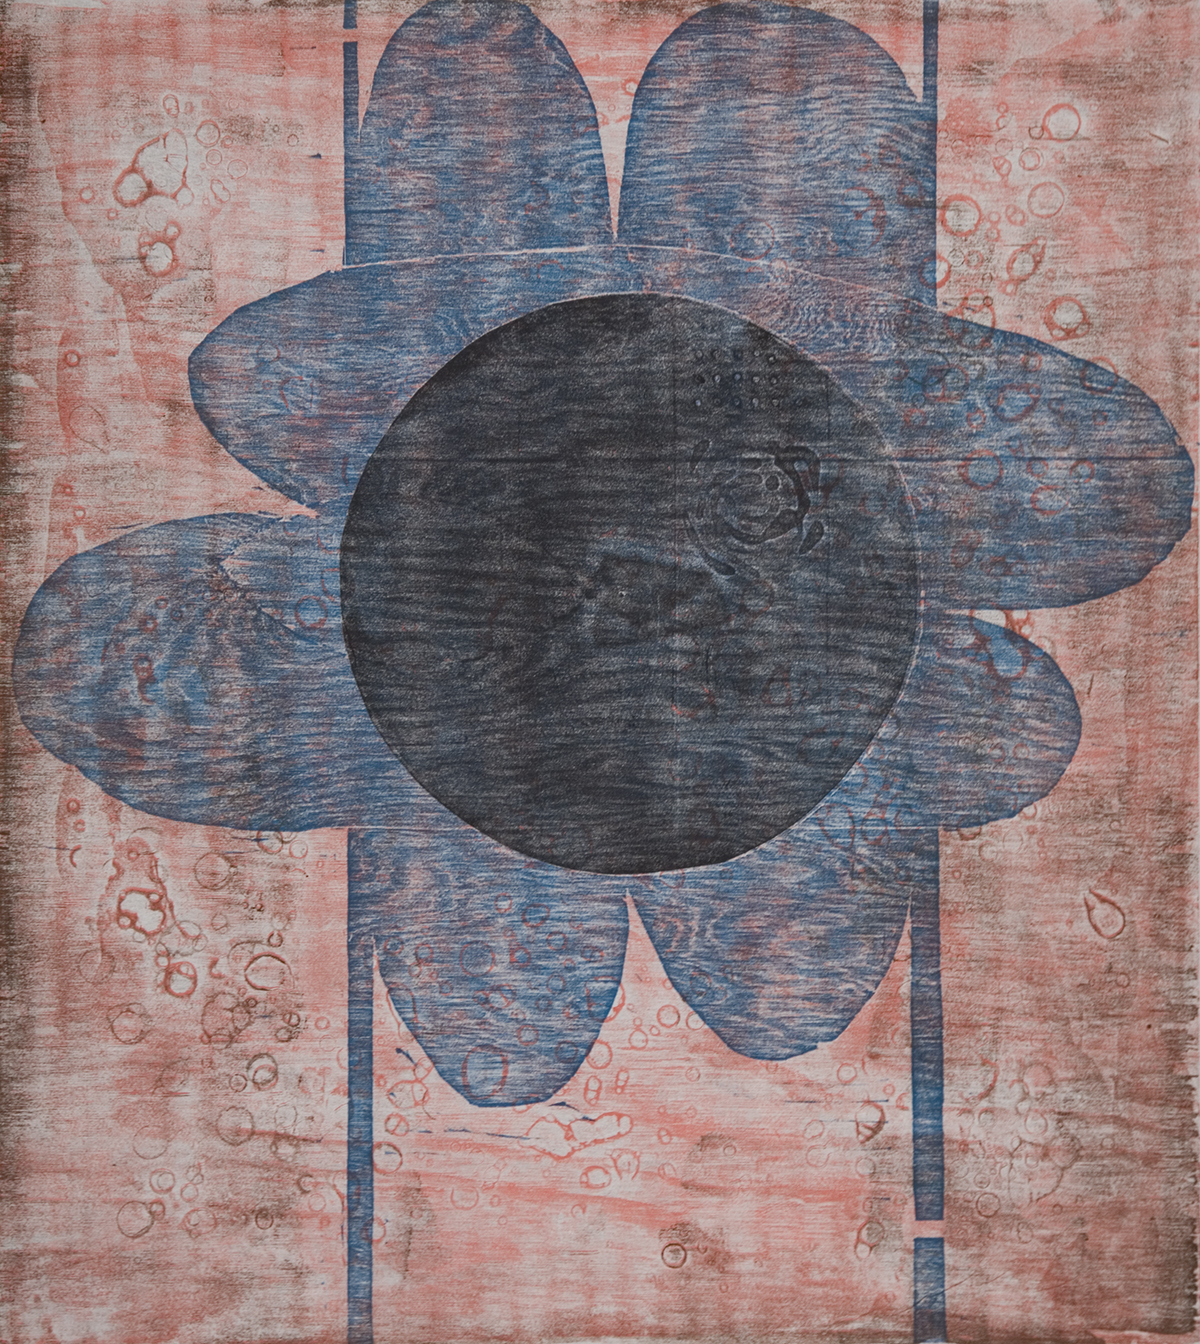 a woodblock print of a large blue flower with a black circular center. The background is pink. Two thin blue lines run vertically behind the flower. The wood grain can be seen over the whole print. 